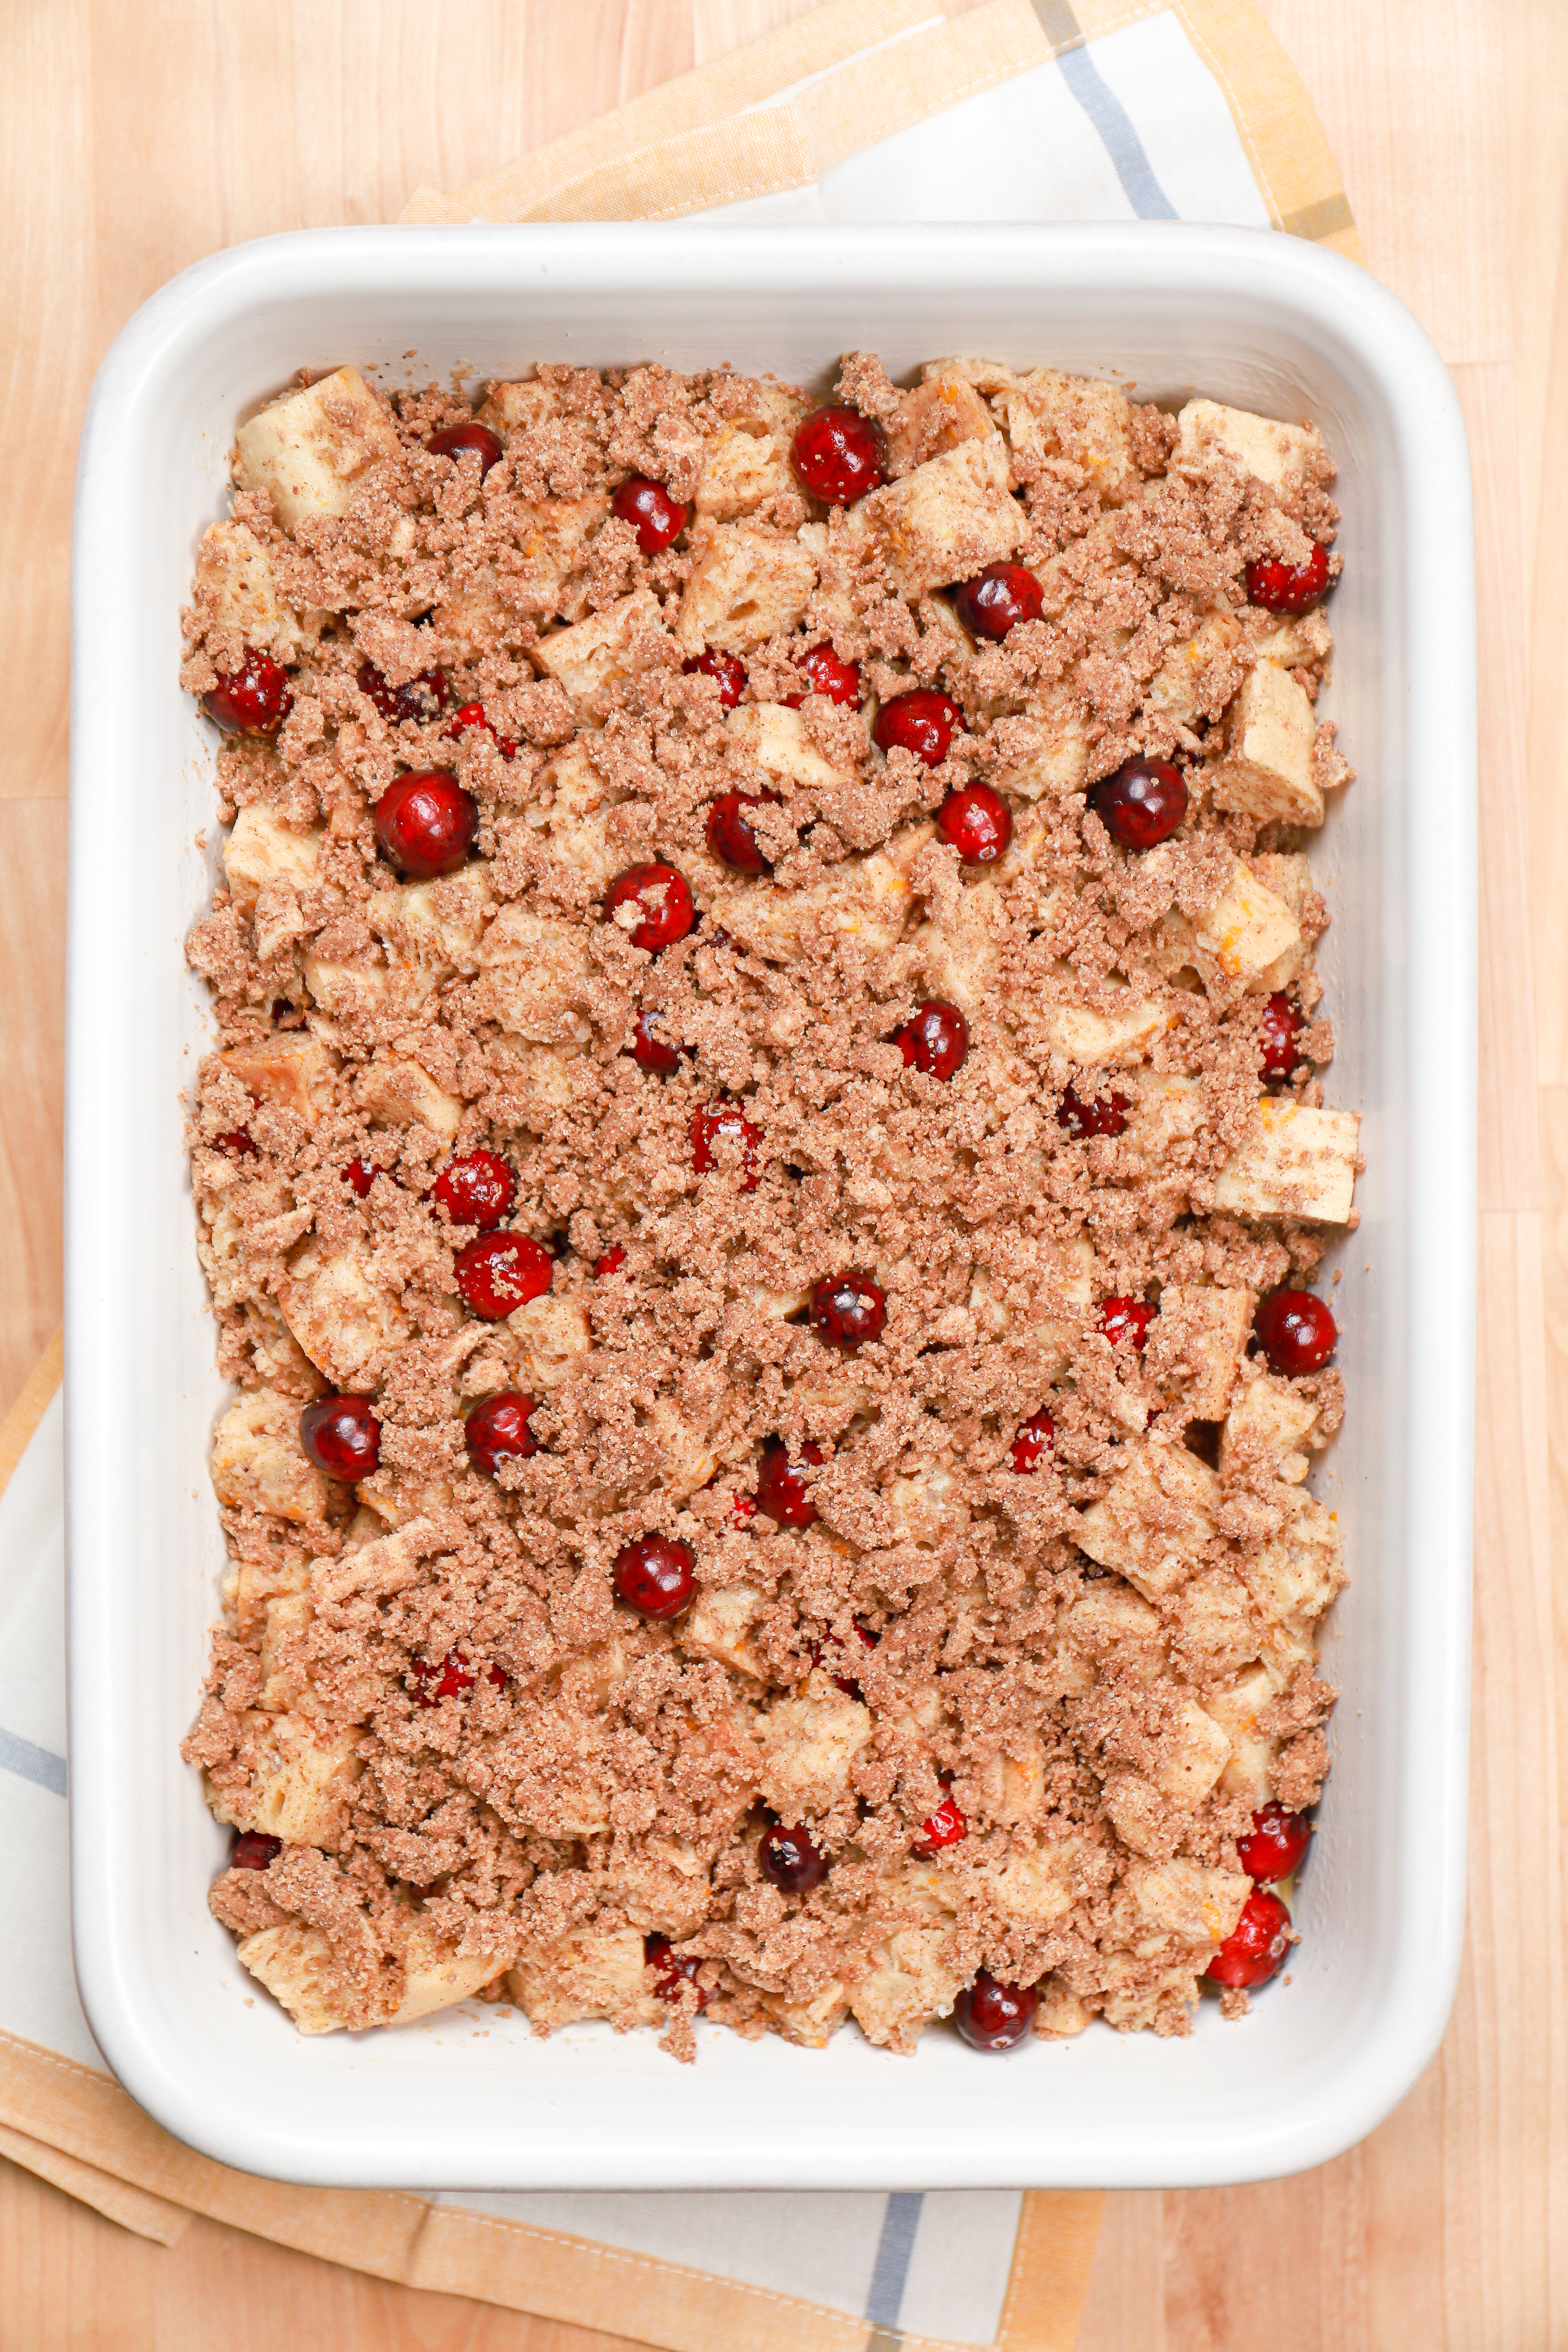 Cranberry orange french toast bake in a white casserole dish right before baknig.